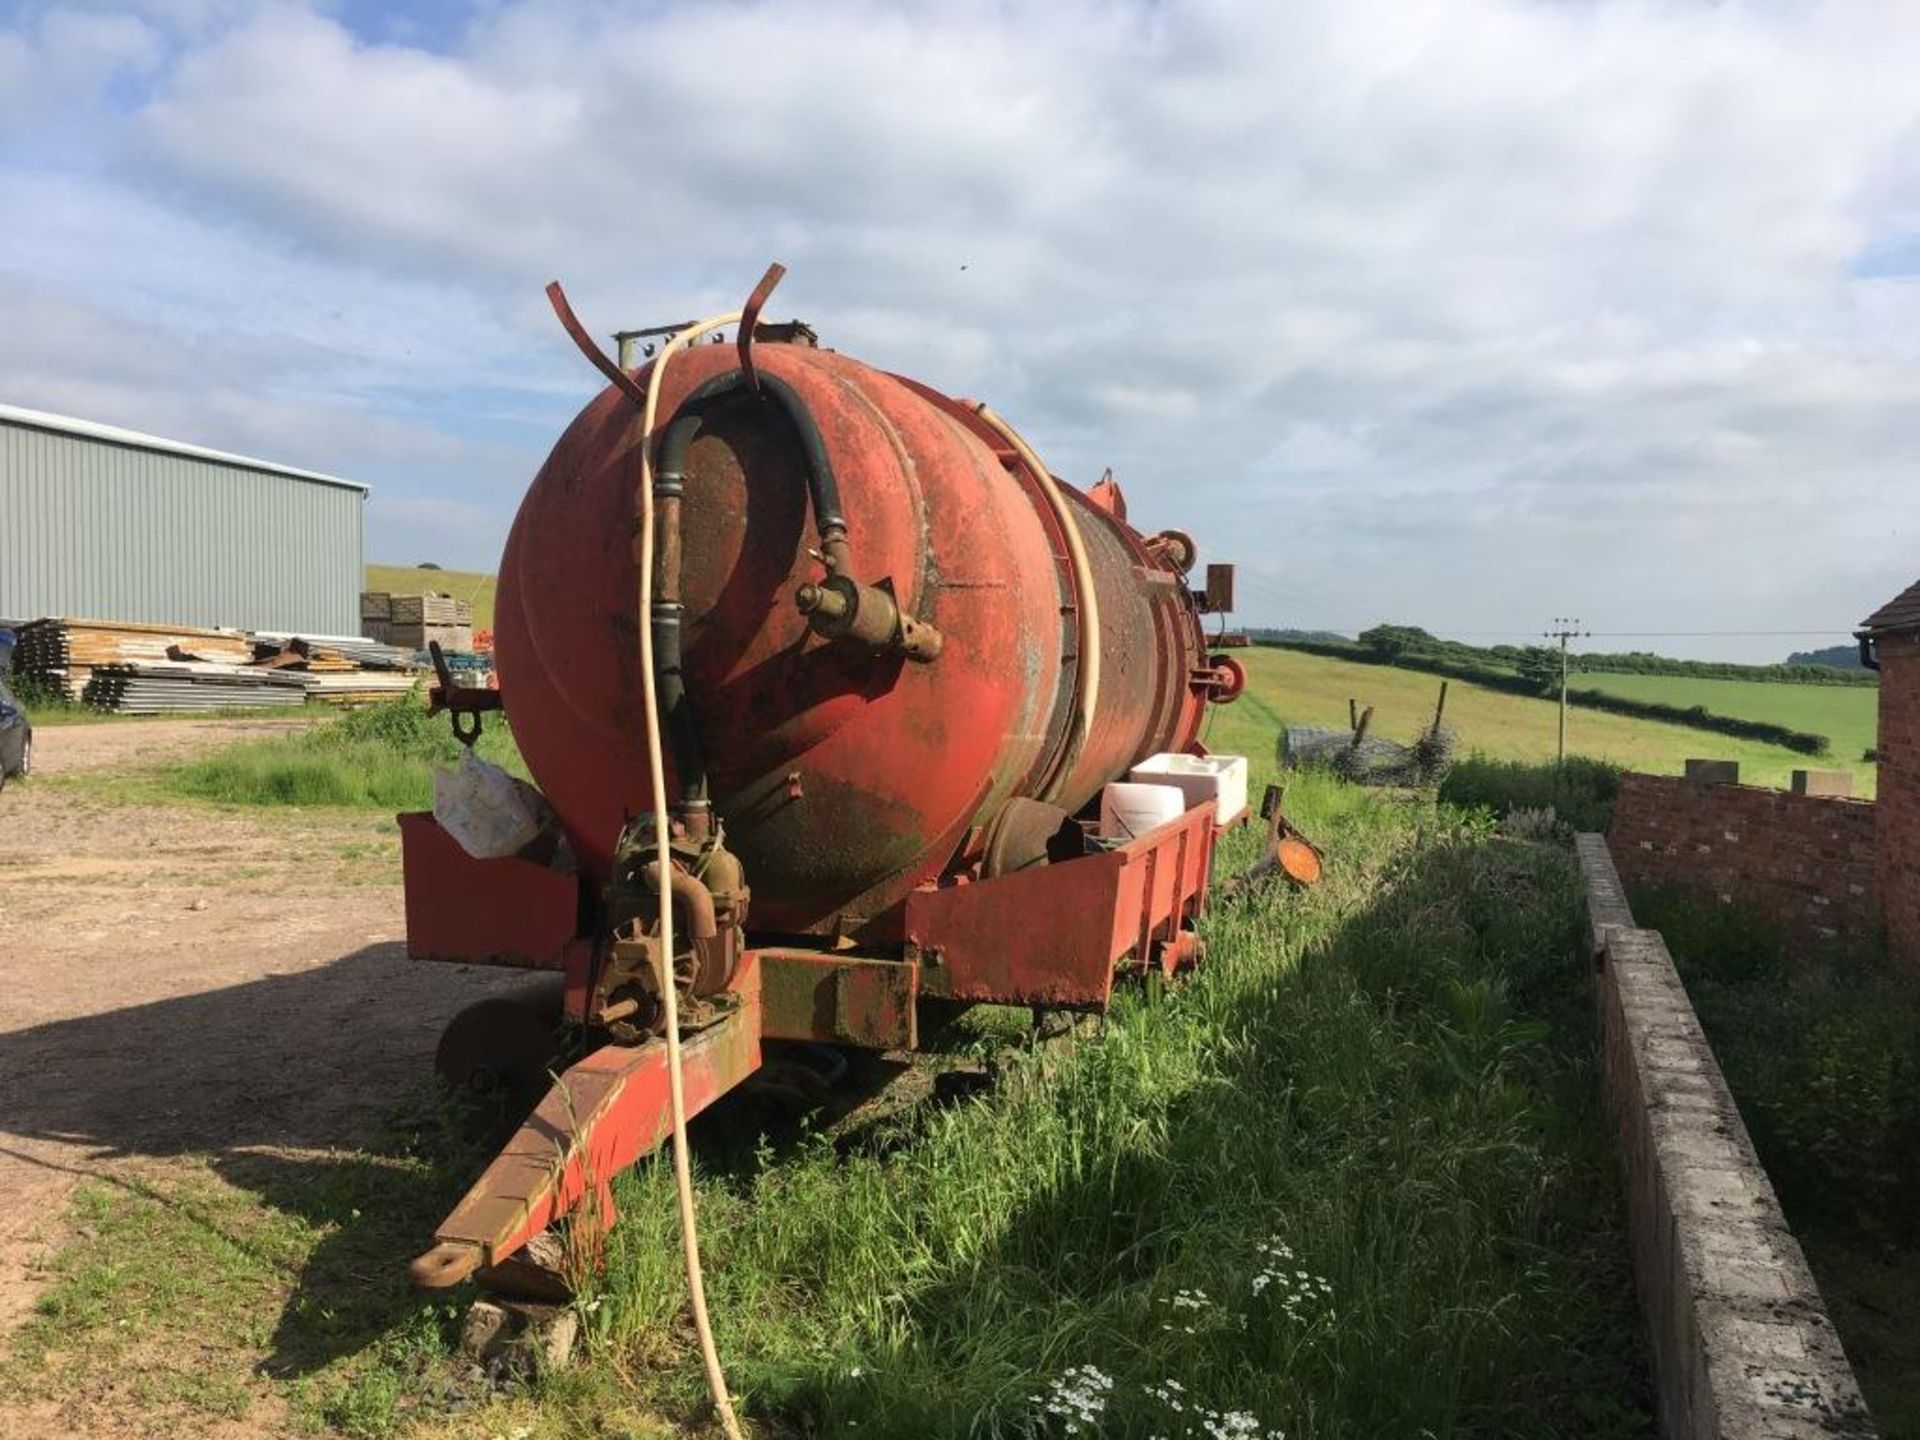 Farm-converted water bowser (ex-slurry tanker) (missing wheel/axle, sold as scrap) - Image 8 of 8